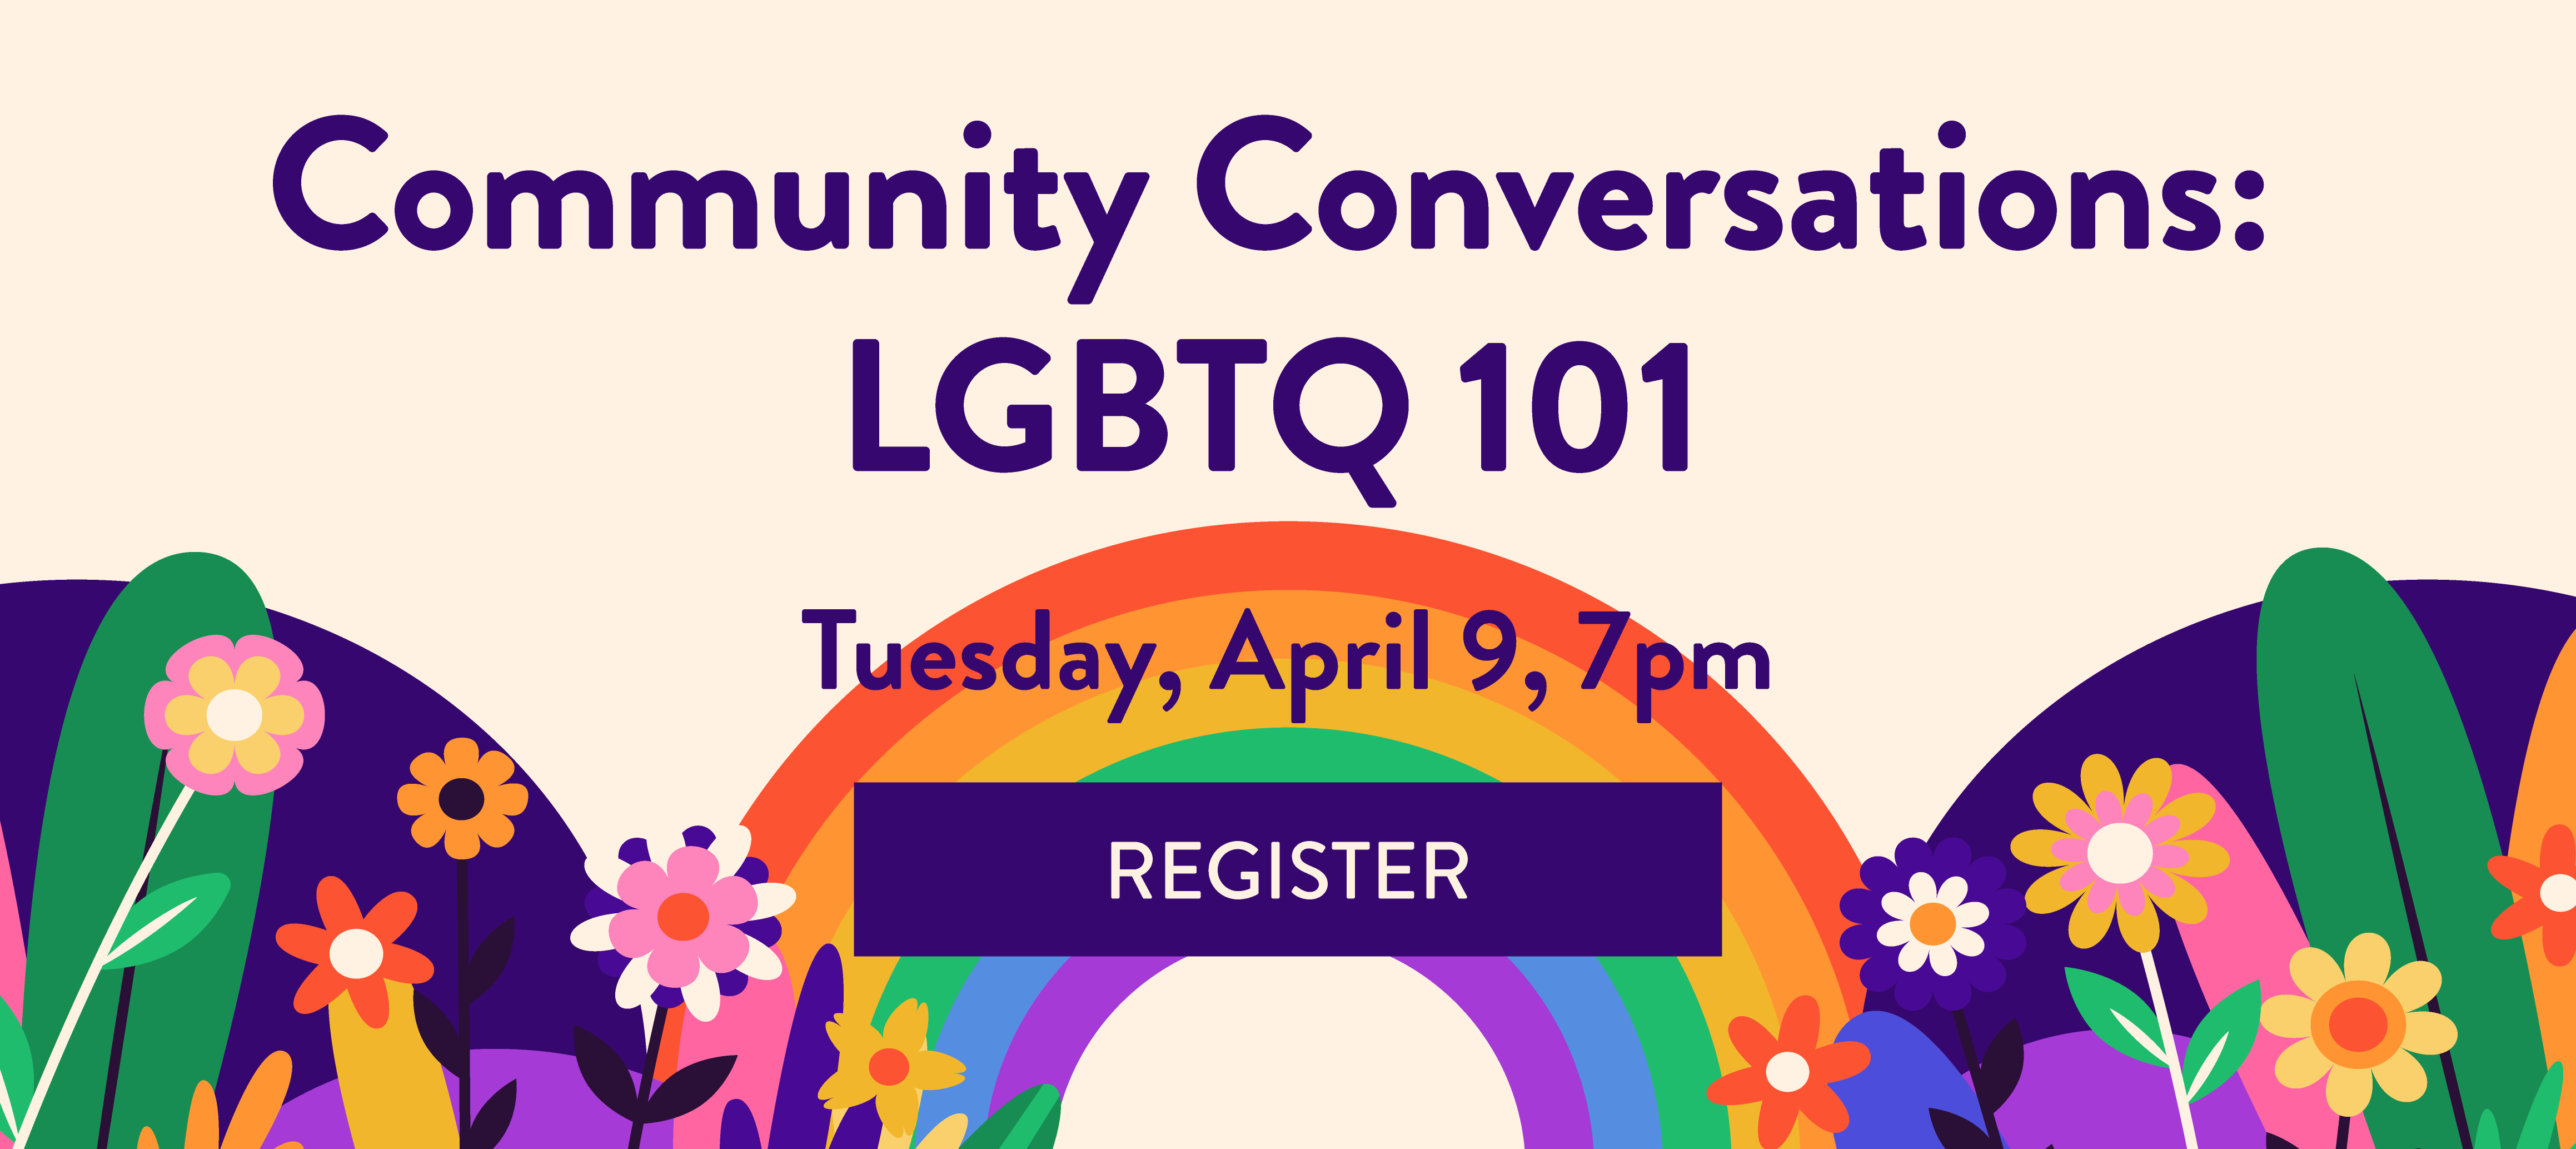 phpl, Prospect Heights Public Library, Community Conversations, LGBTQ 101, Adult